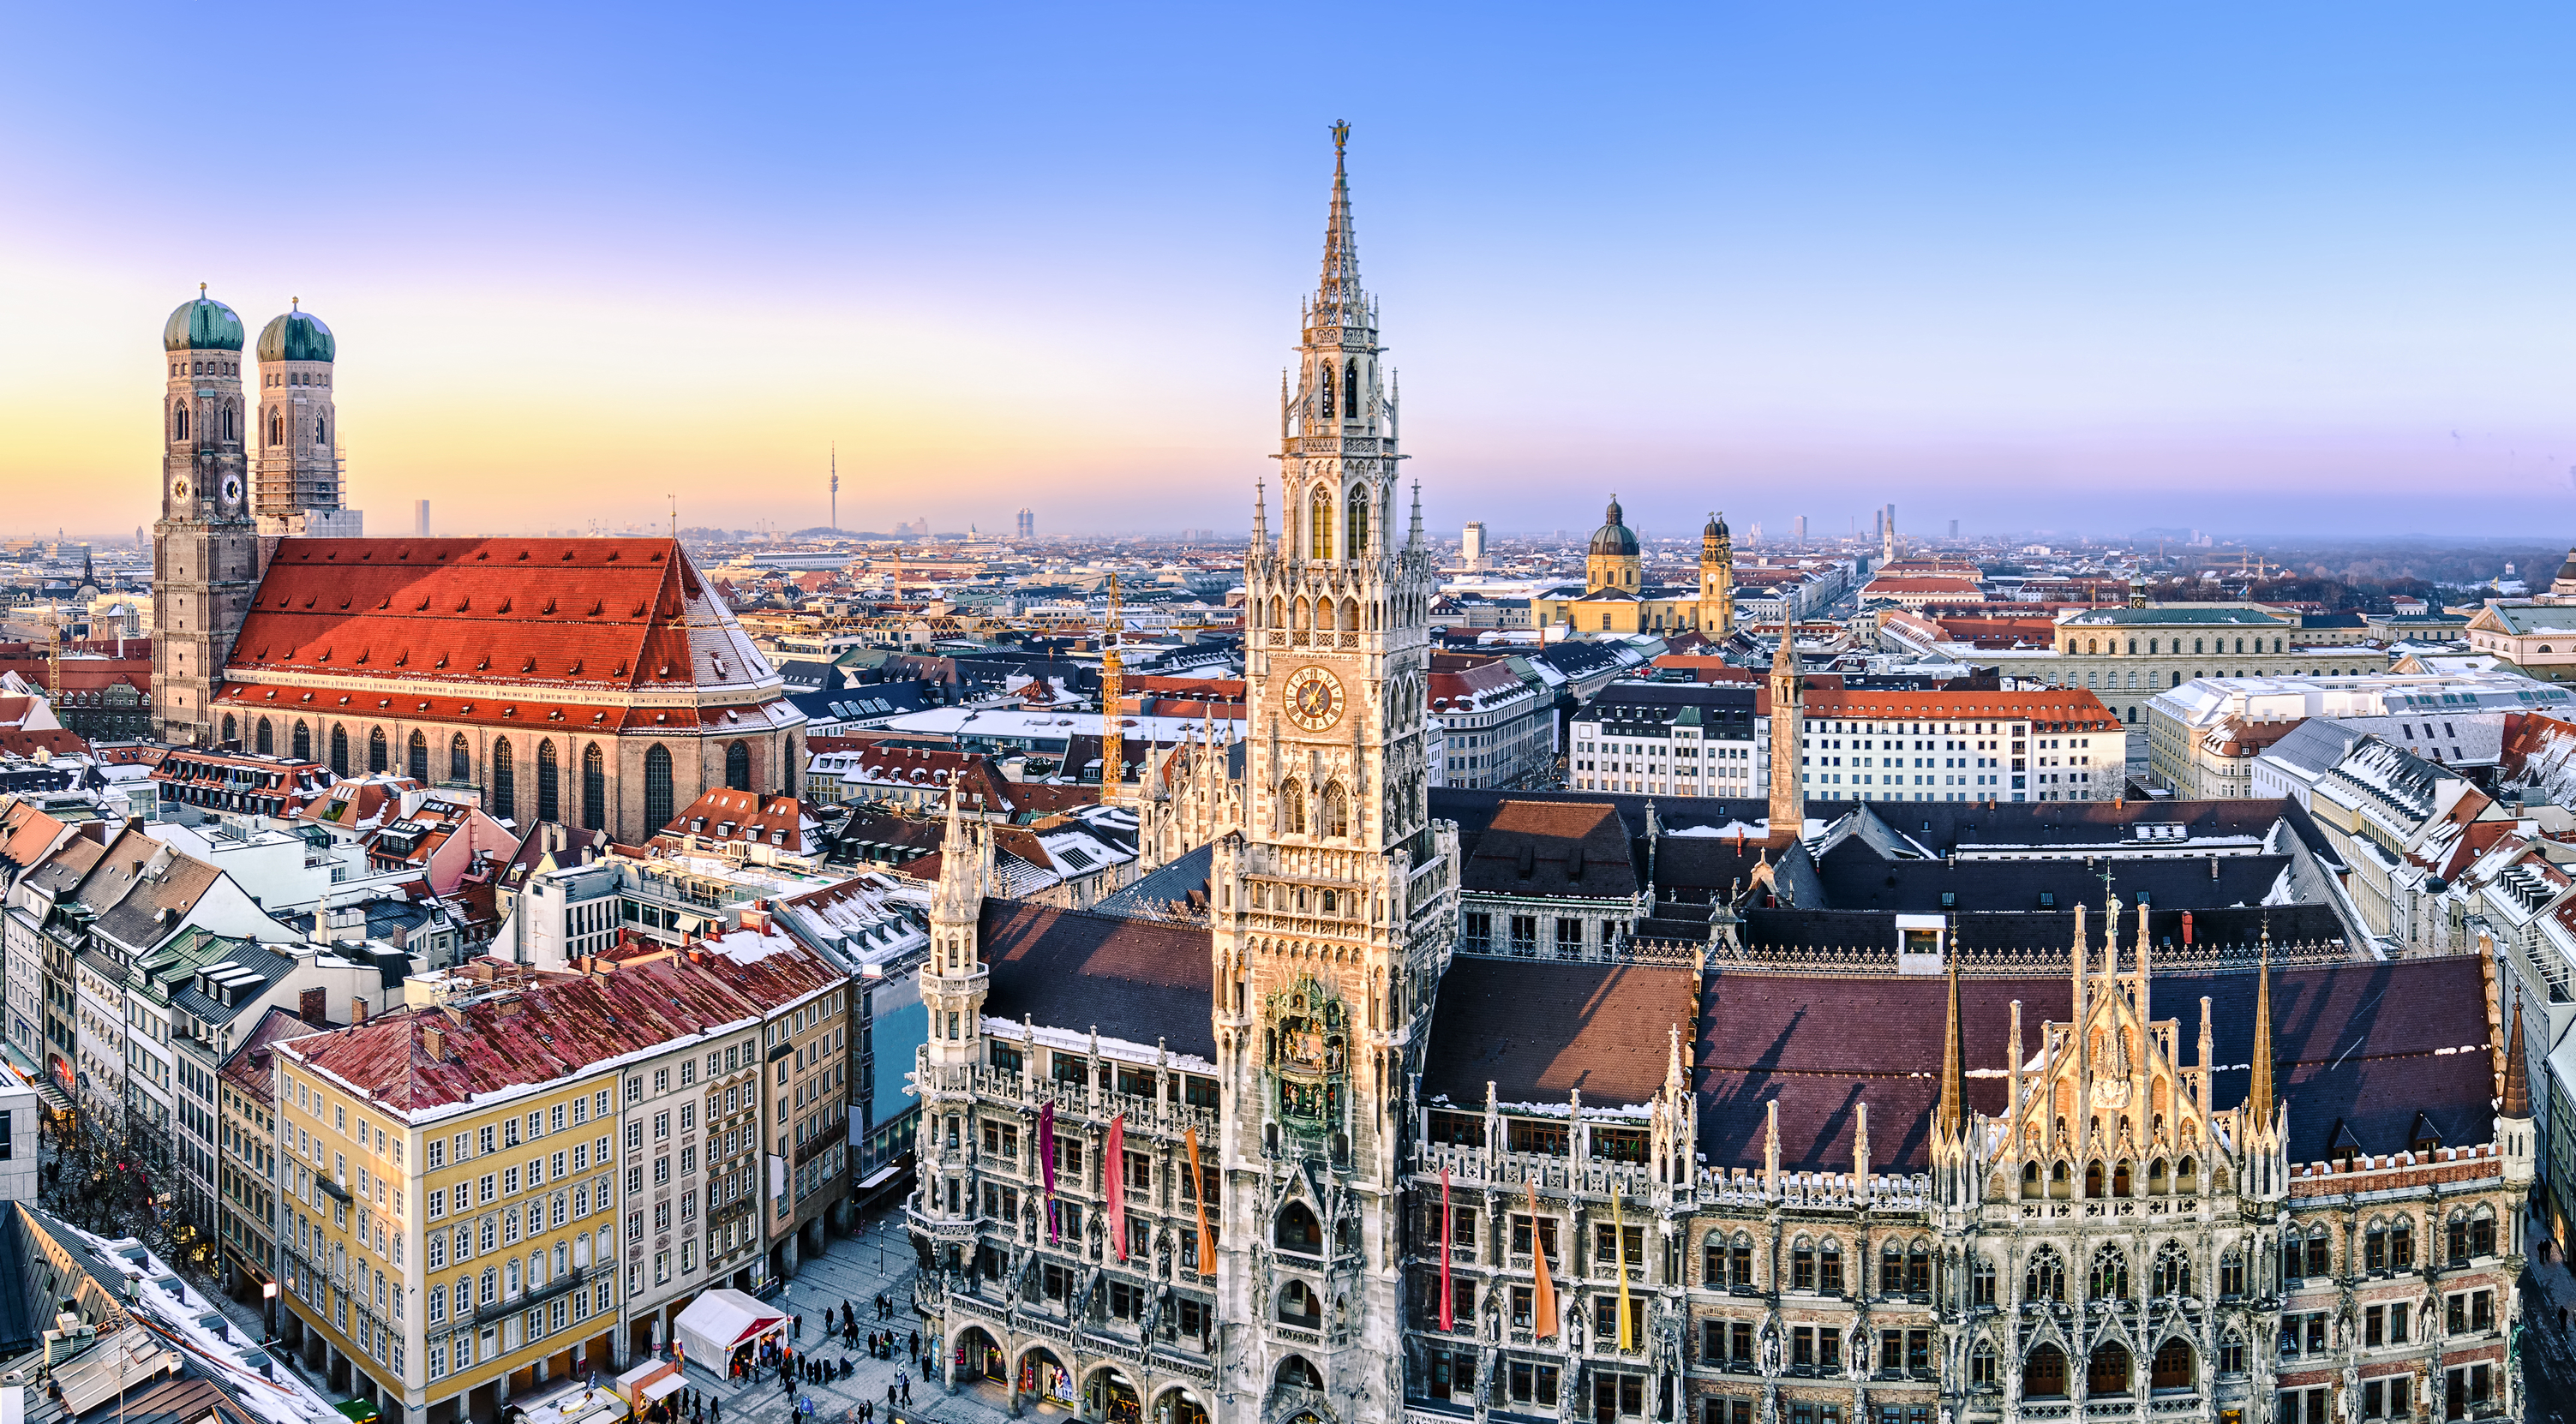 Round-trip fares to Germany from $314